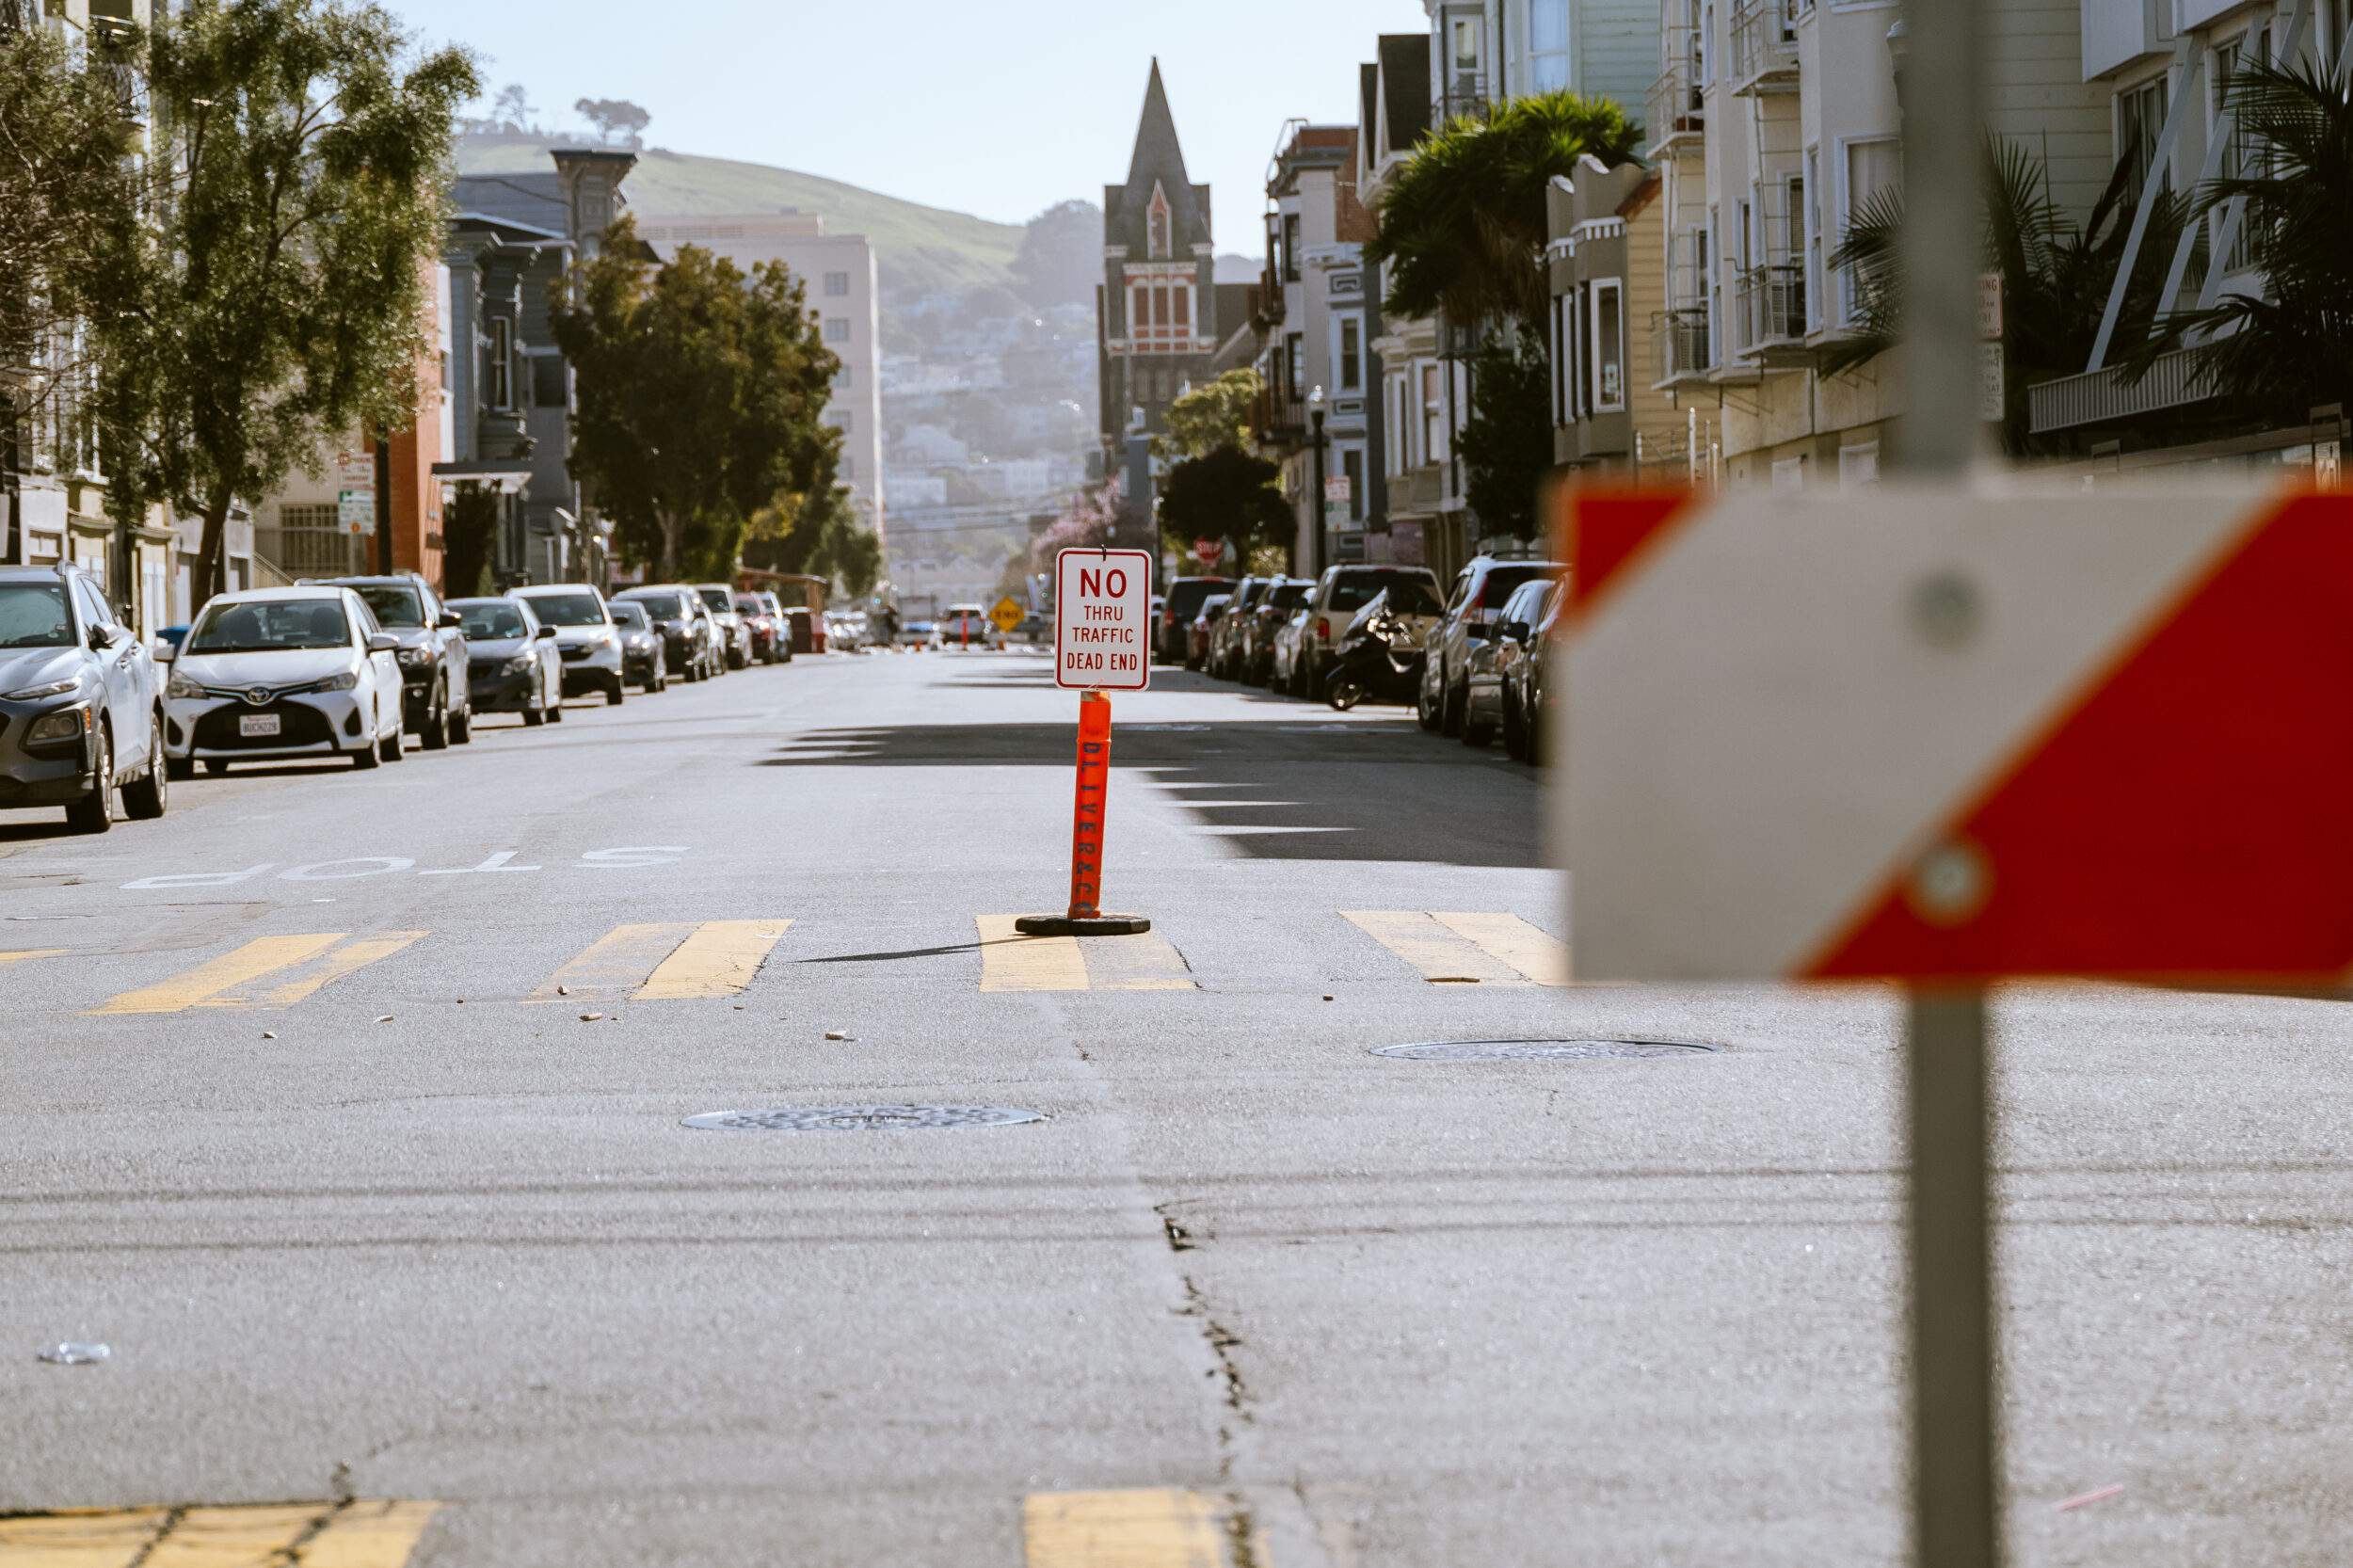 A traffic sign sits on an orange delineator on a San Francisco street on a sunny day with hills in the background.